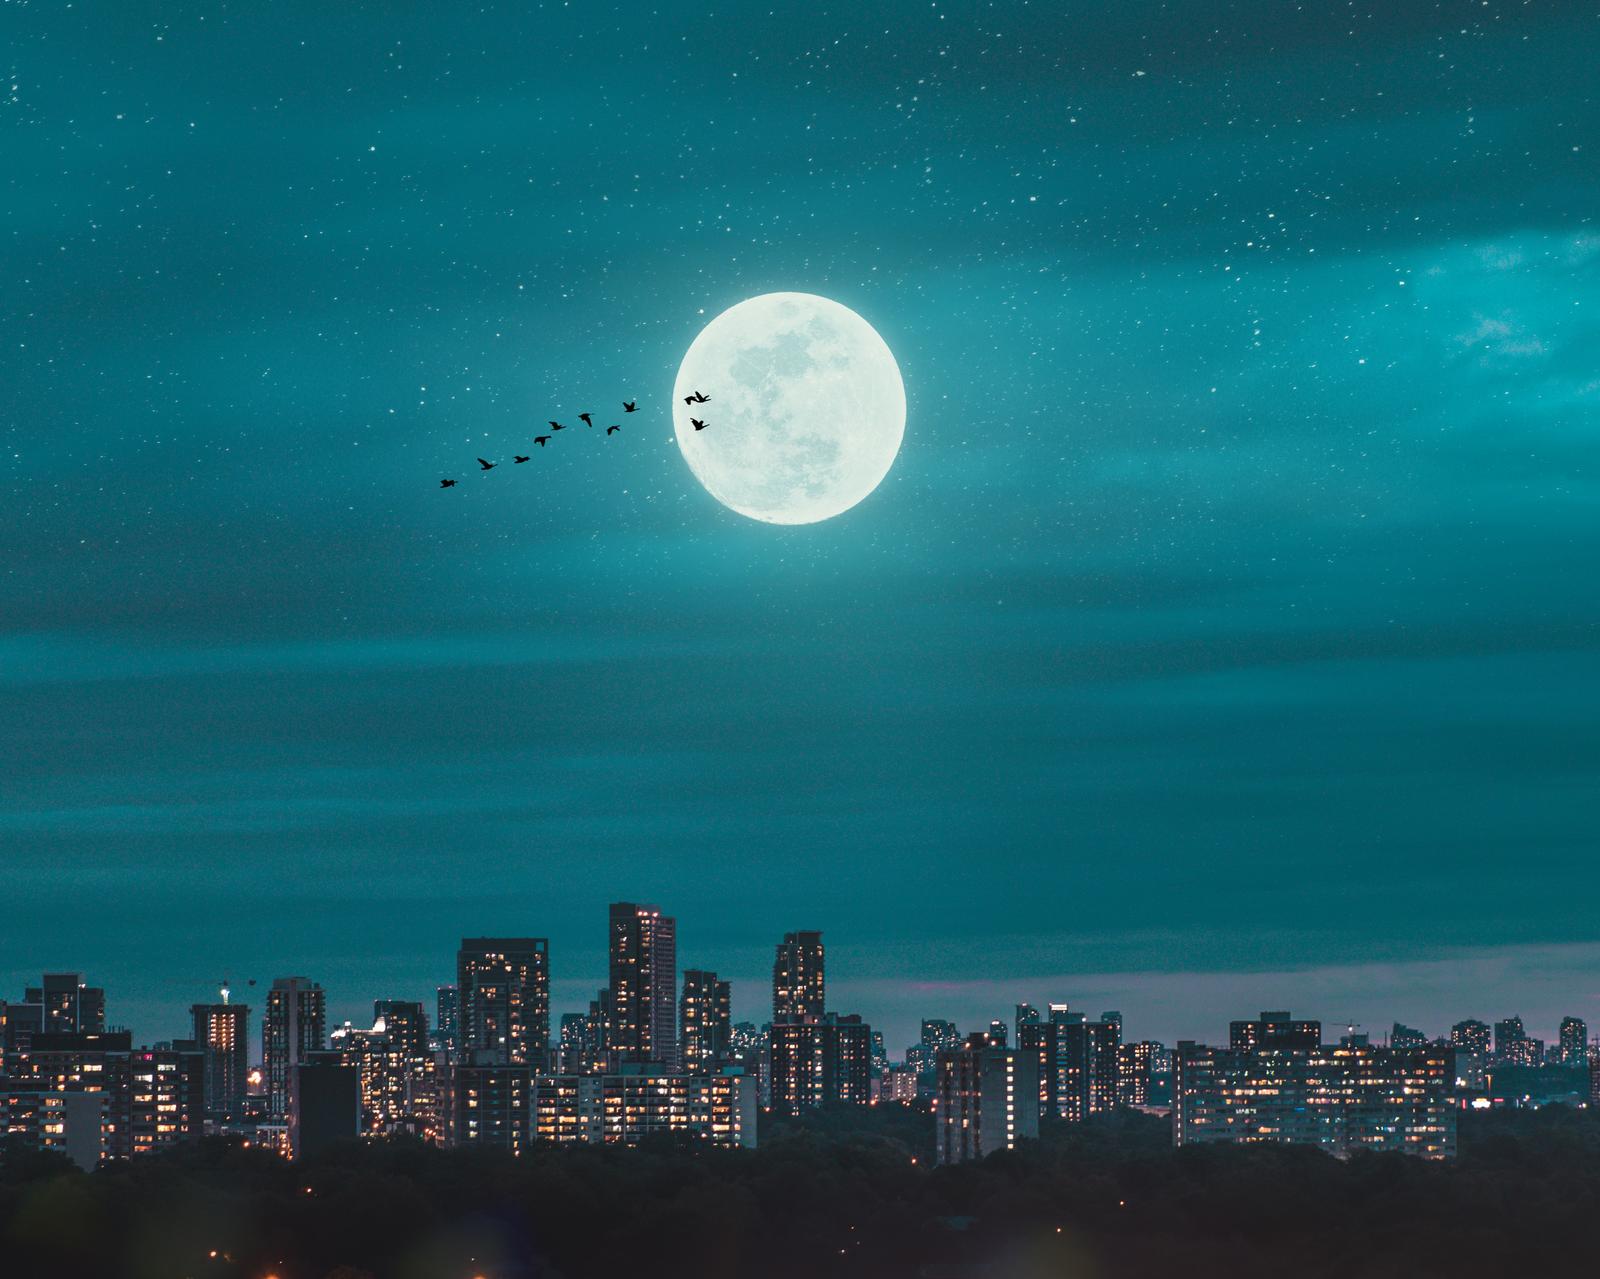 This 🌔 Fantasy Quiz Is Scientifically Designed to Determine What Supernatural Being You’re Most Like Full moon over city skyline during night time